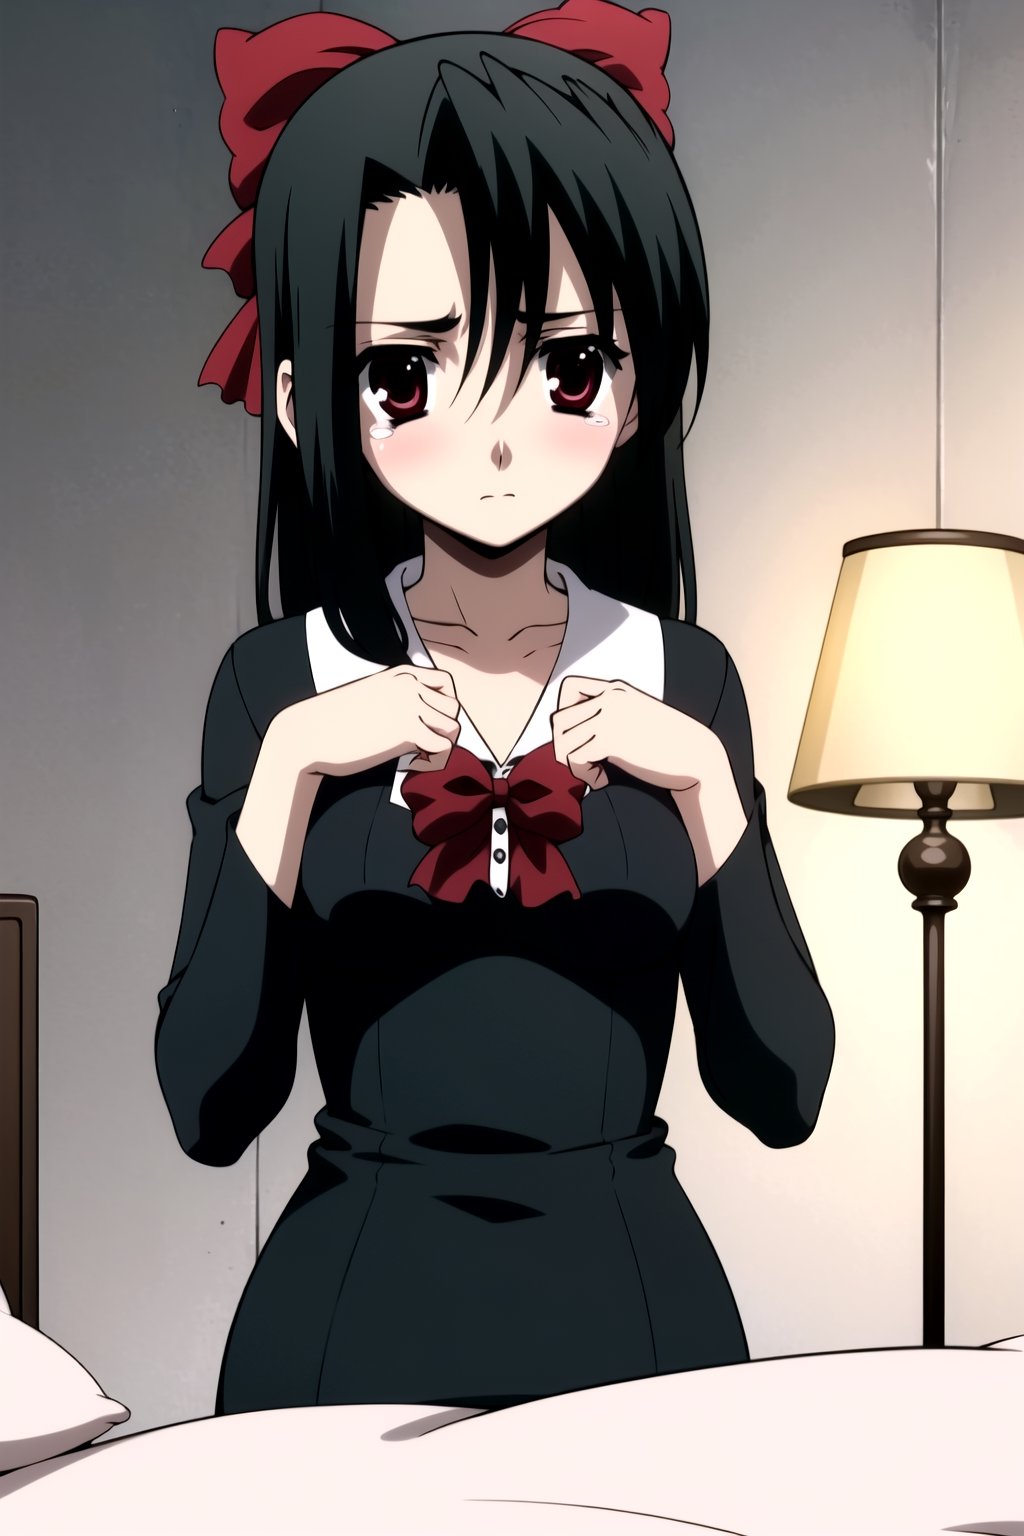 In a dimly lit room with a subtle glow emanating from the bedside lamp, Setsuna Kiyoura, a young woman with striking red eyes and jet-black hair tied back by a vibrant red bow, lies on her side in the center of a white-sheeted double bed. Her petite frame is clad in a black pinafore dress adorned with a grey T-shirt and long sleeves, accentuating her modest bust. As she gazes directly at the viewer with a look of disappointment etched on her tear-stained face, her slender fingers grasp the edge of the bed, as if searching for solace or guidance.